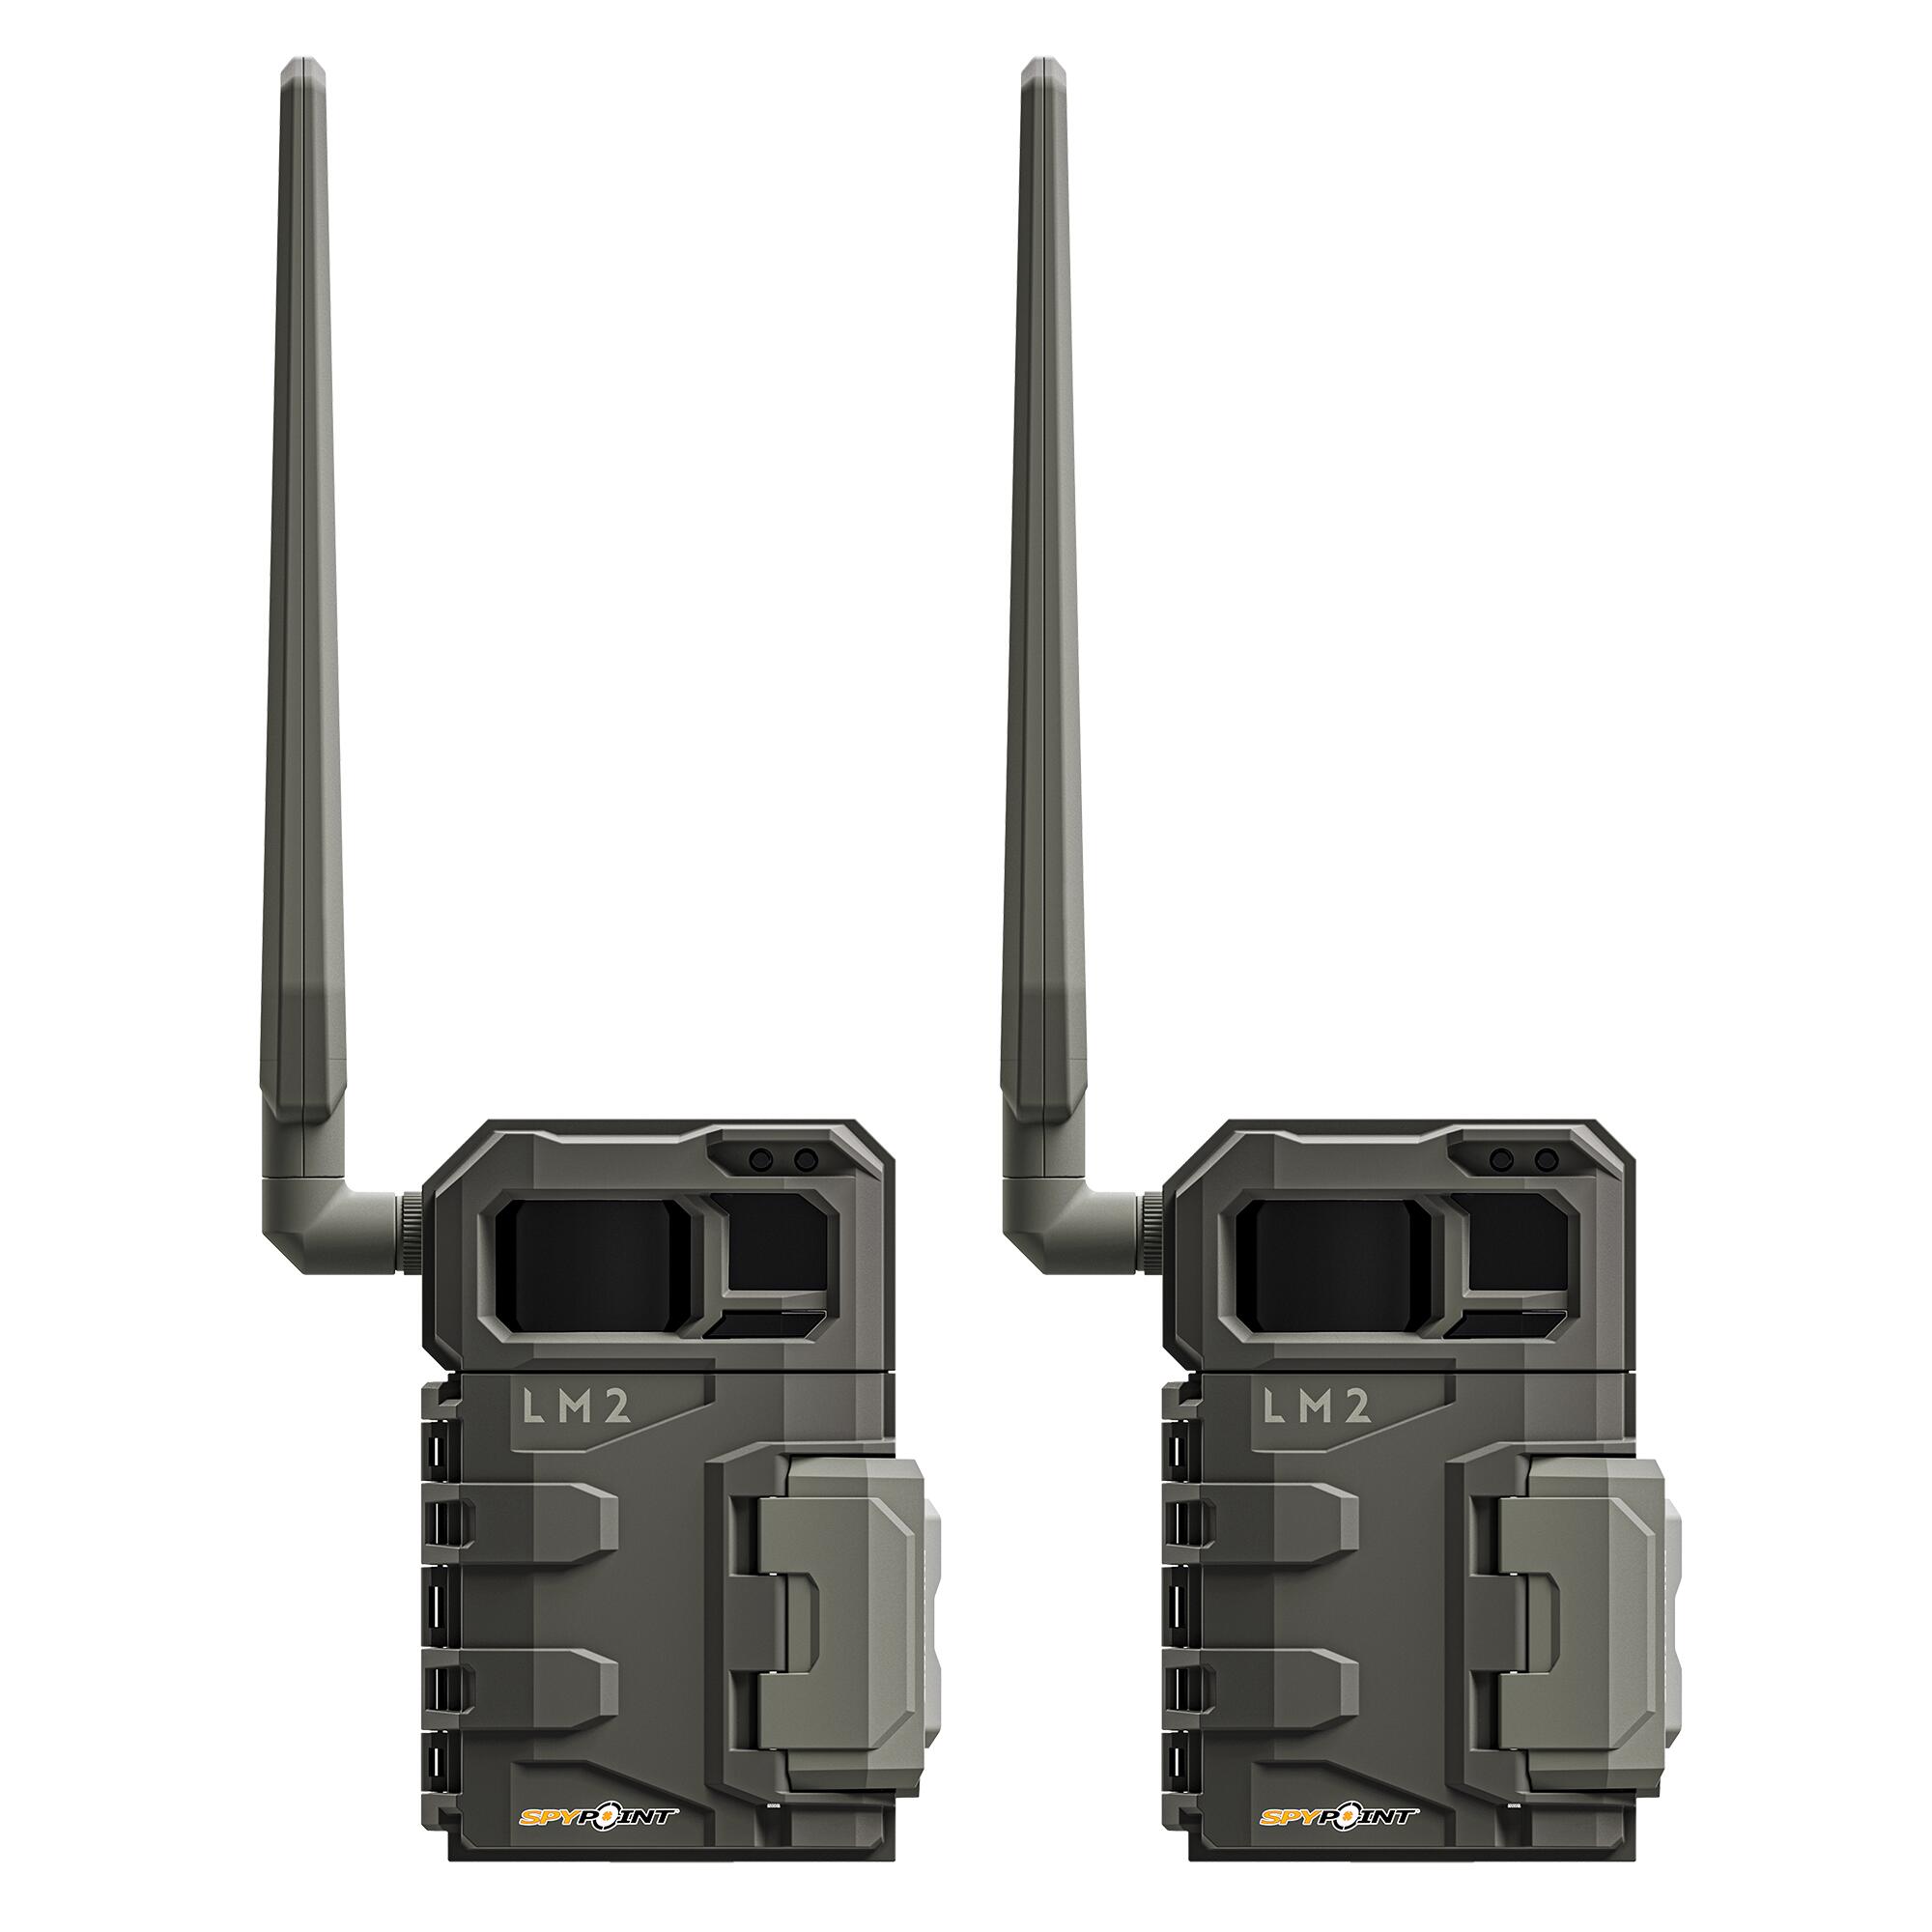 SPYPOINT PACK of 2 cellular trail cameras Spypoint LM2 TWIN PACK